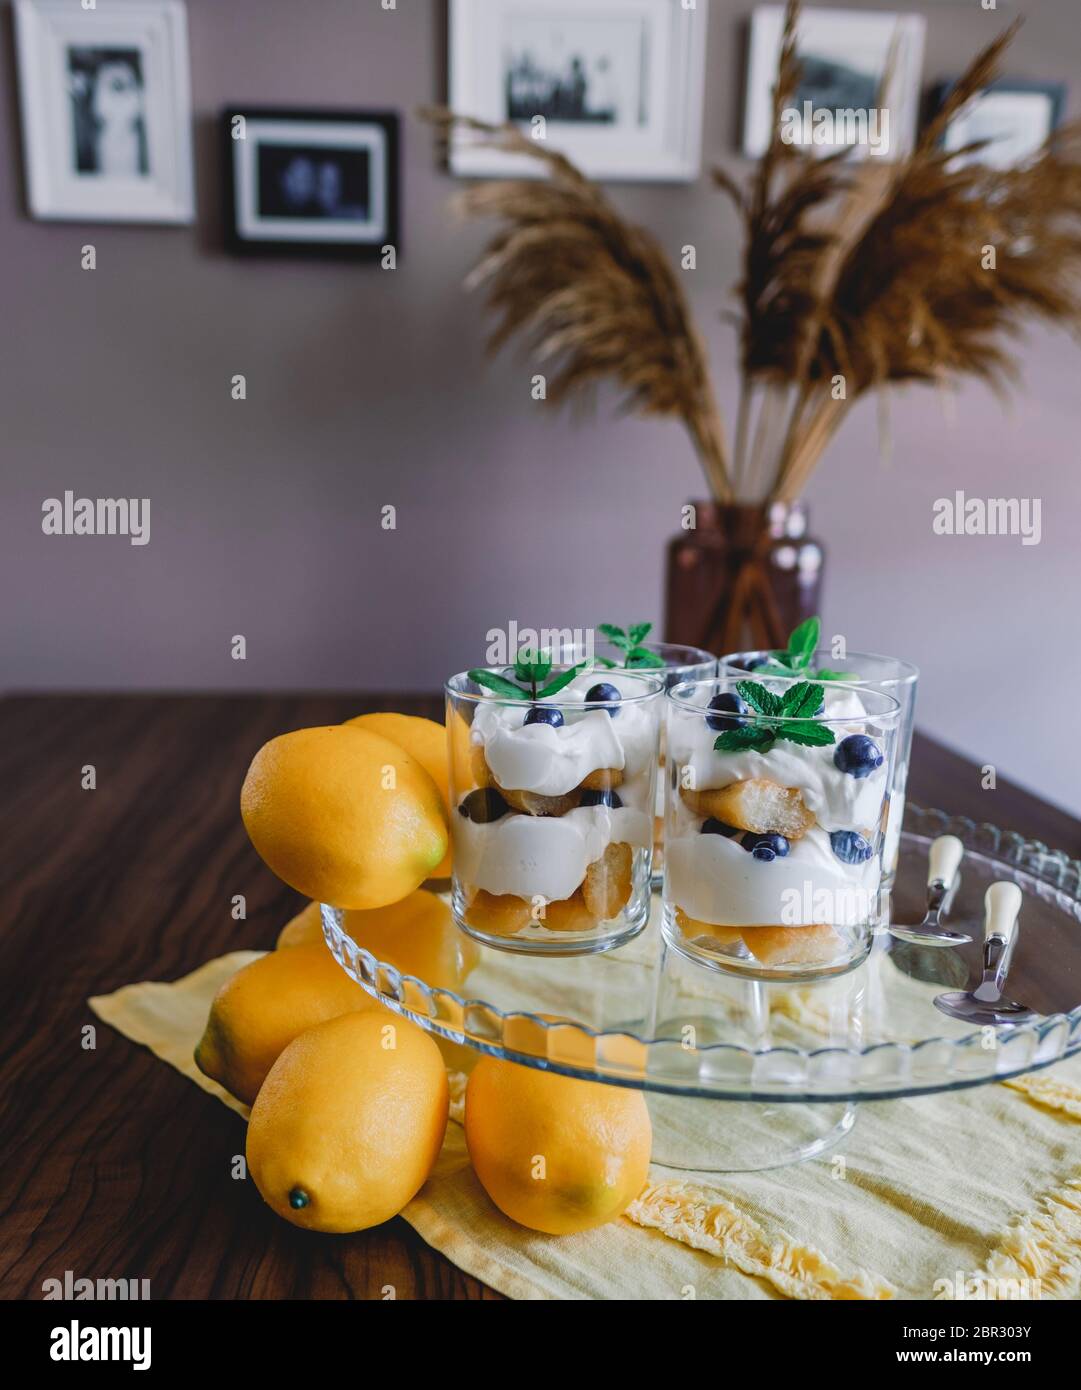 Homemade tiramisu with lemons served on table. Top view of delicious dessert in glass cups. Stock Photo